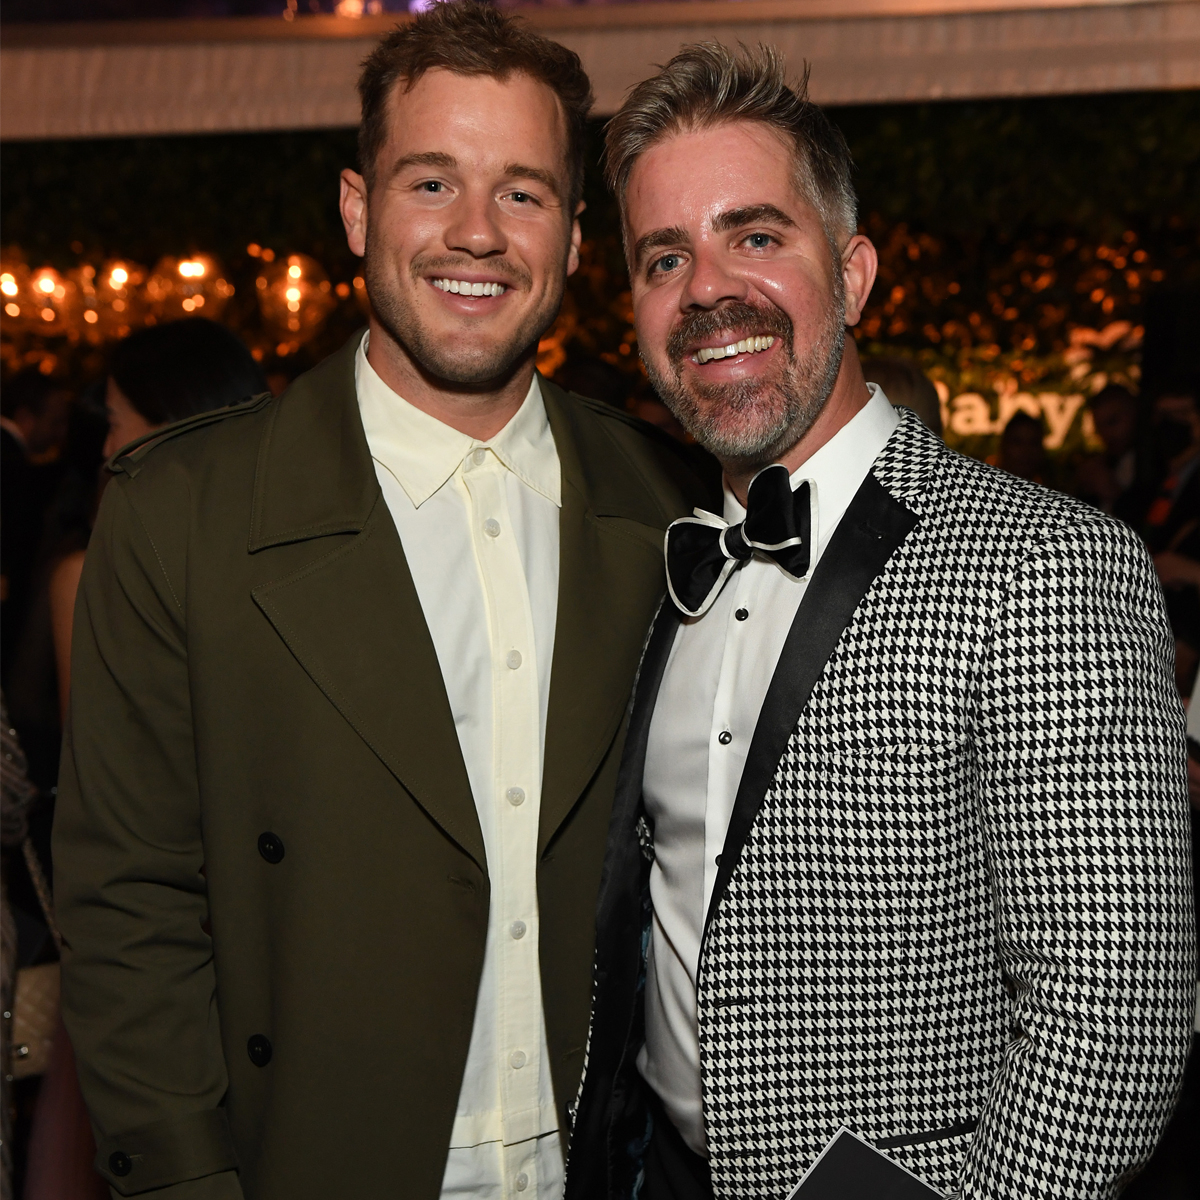 Colton Underwood Goes Instagram Official With Boyfriend Jordan C. Brown to Celebrate His Birthday - E! Online